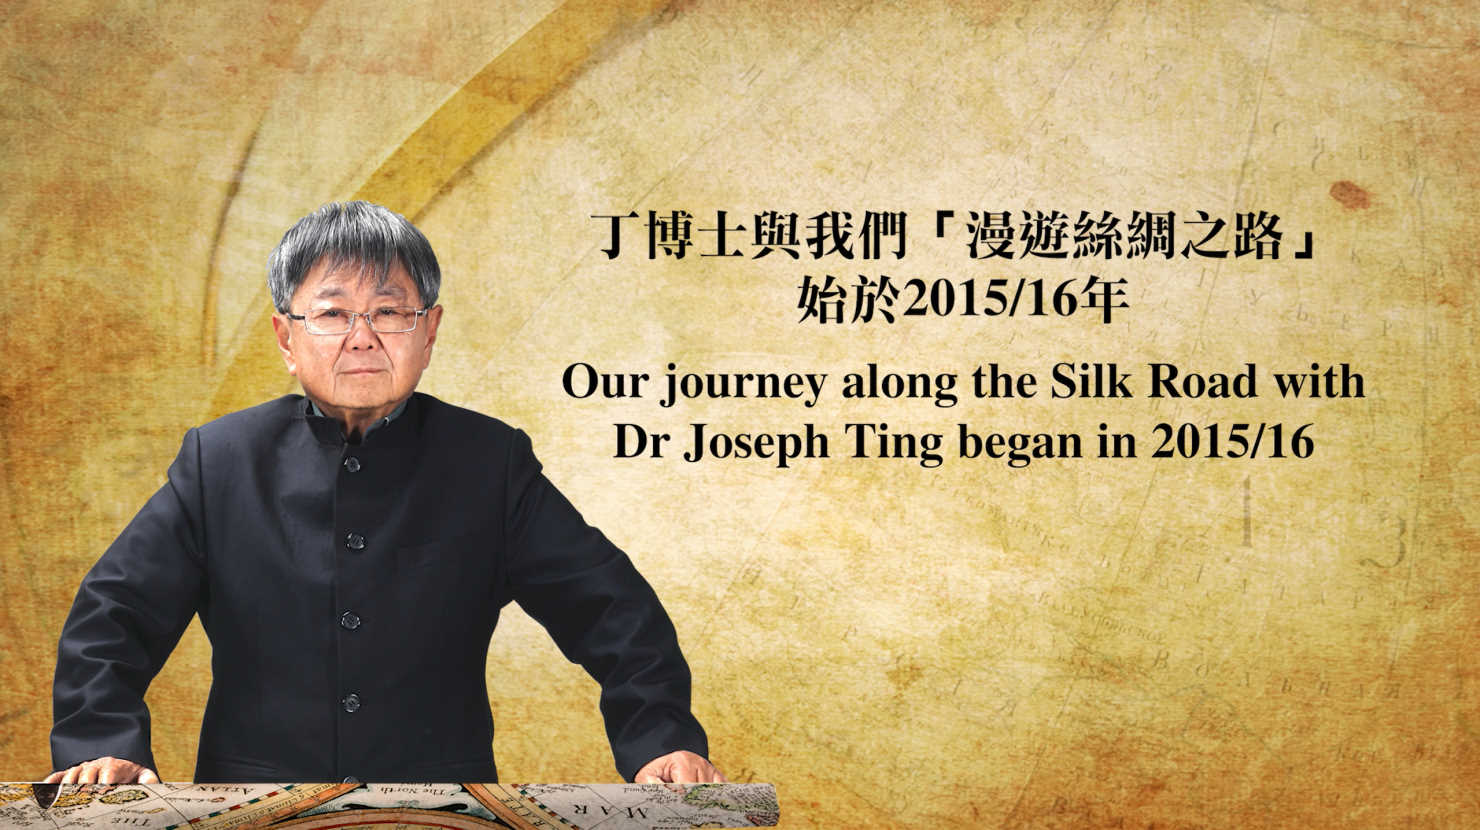 Our journey along the Silk Road with Dr Joseph Ting begun in 2015/16